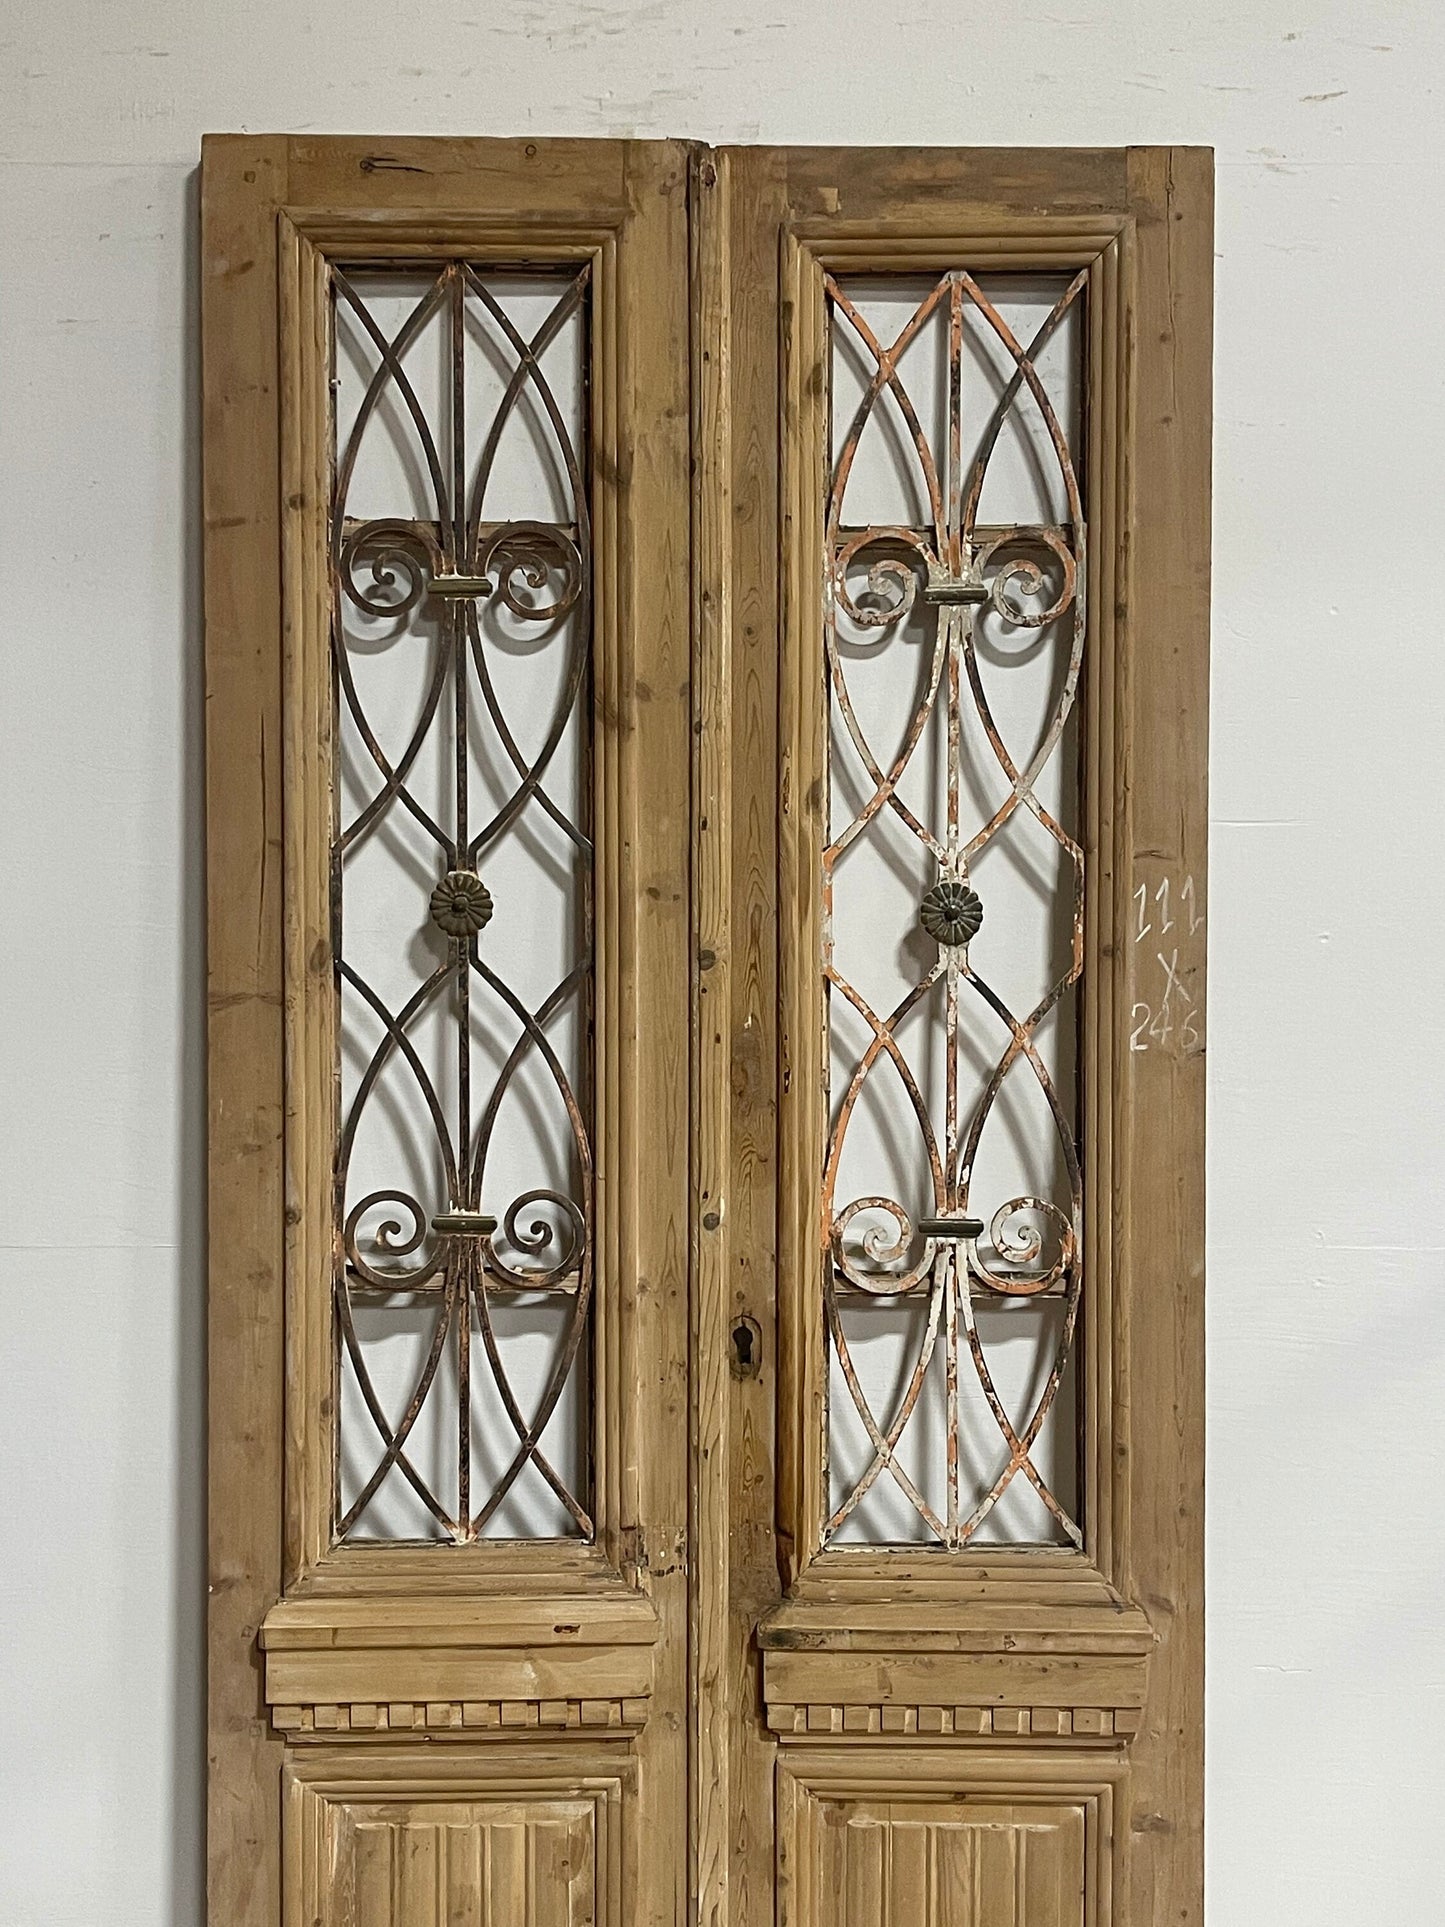 Antique French panel doors with metal (96x43.5) H0021s